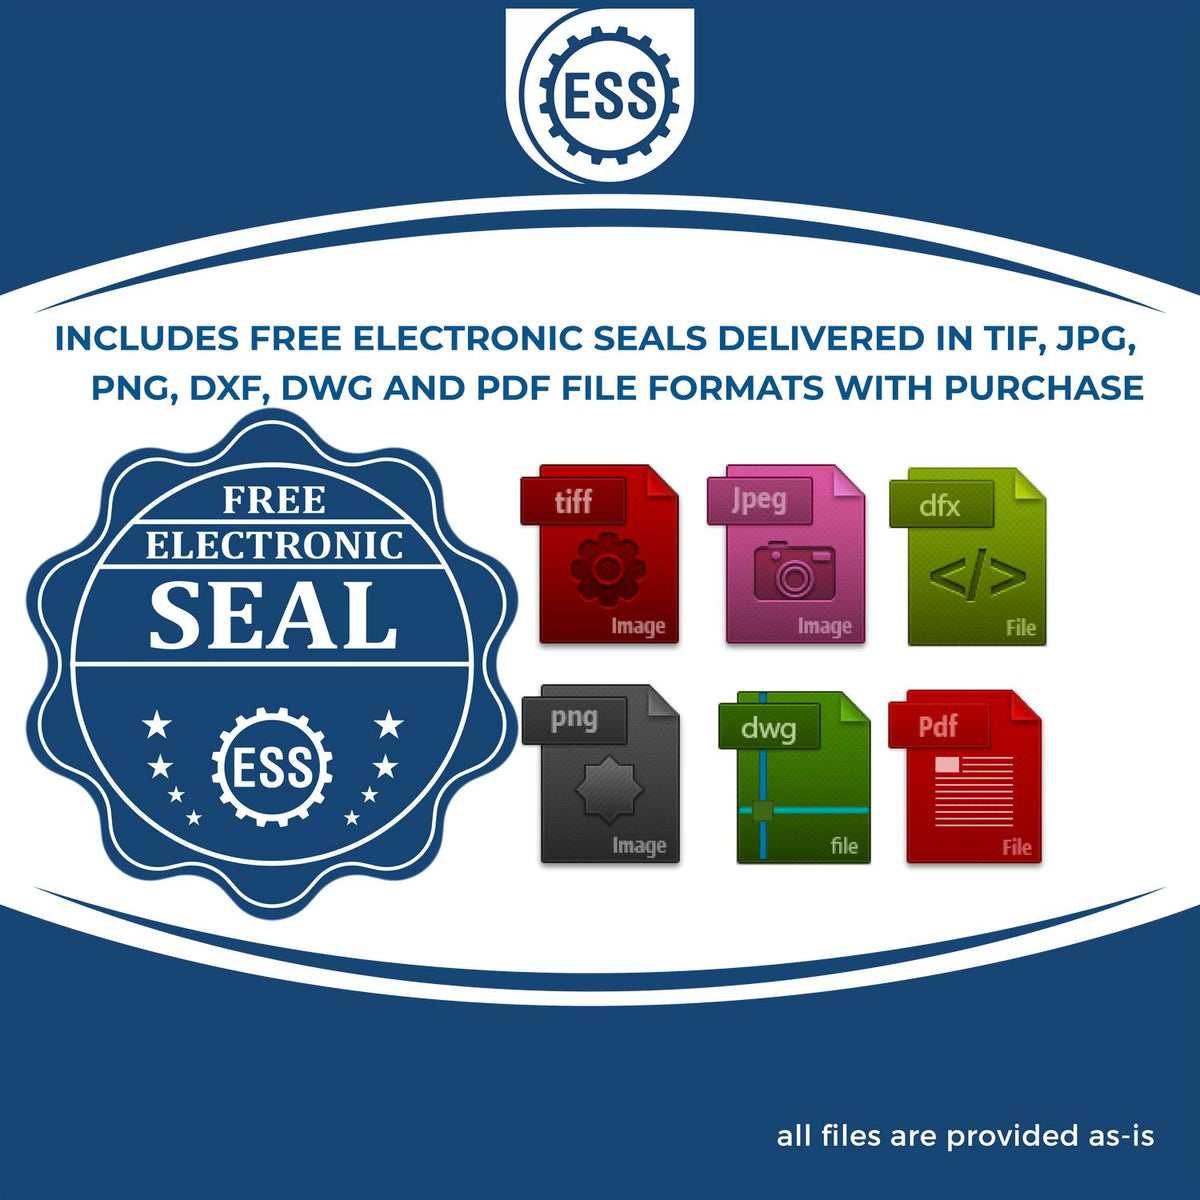 An infographic for the free electronic seal for the Self-Inking Wyoming Landscape Architect Stamp illustrating the different file type icons such as DXF, DWG, TIF, JPG and PNG.